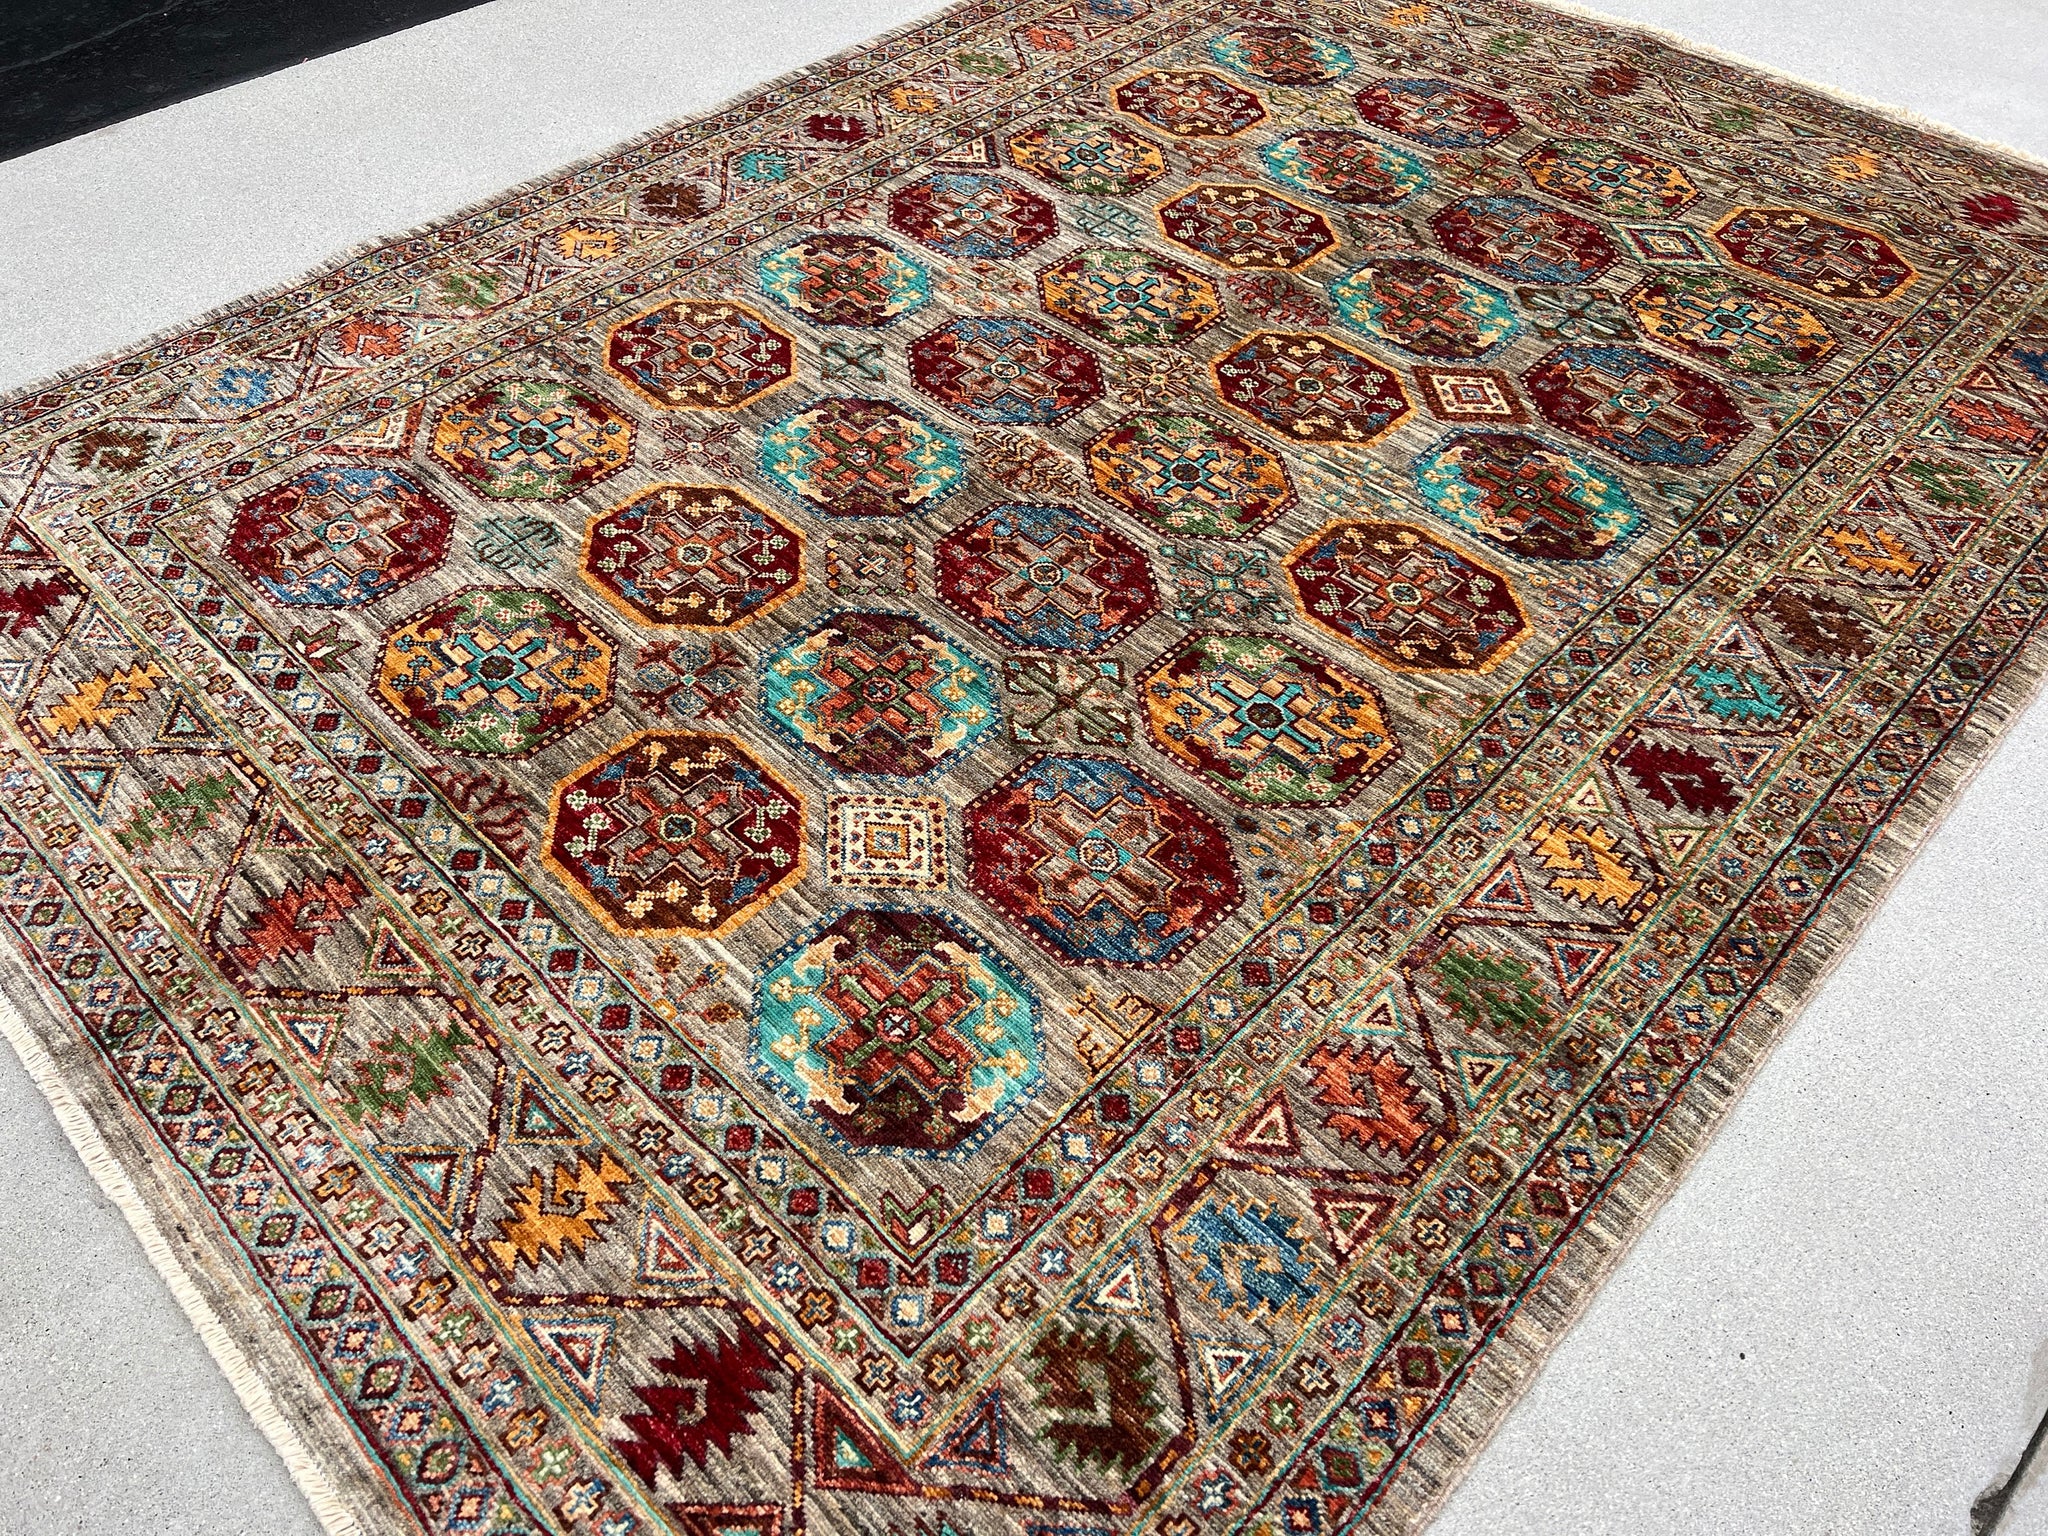 6x8 Handmade Afghan Rug | Brown Grey Orange Red Turquoise Blue Green White Black Golden Yellow Maroon | Hand Knotted Persian Boho Bohemian